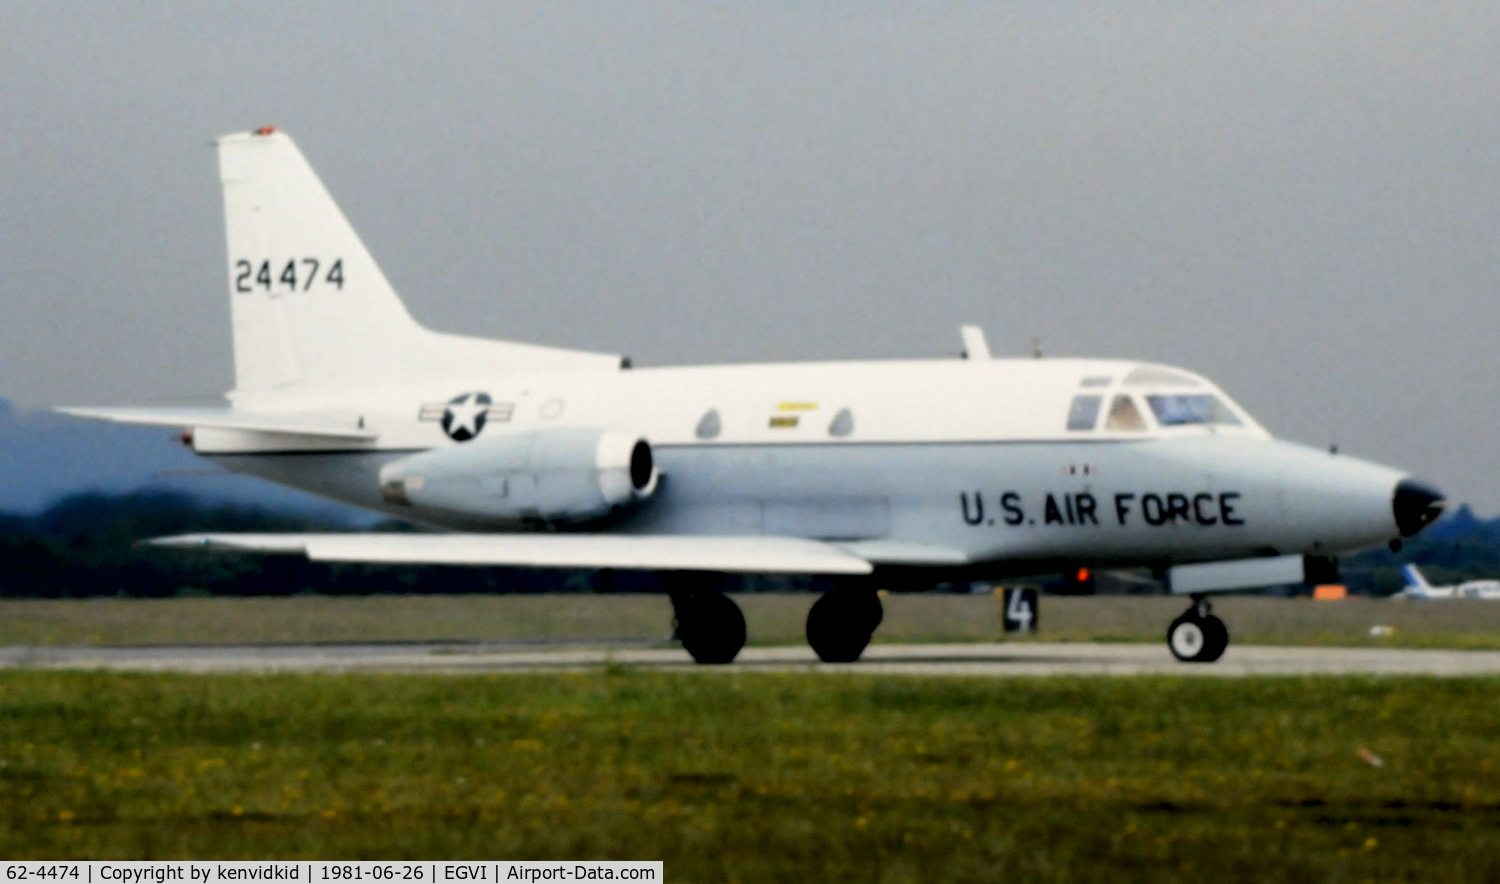 62-4474, 1962 North American CT-39A Sabreliner C/N 276-27, At the 1981 International Air Tattoo, scanned from slide.